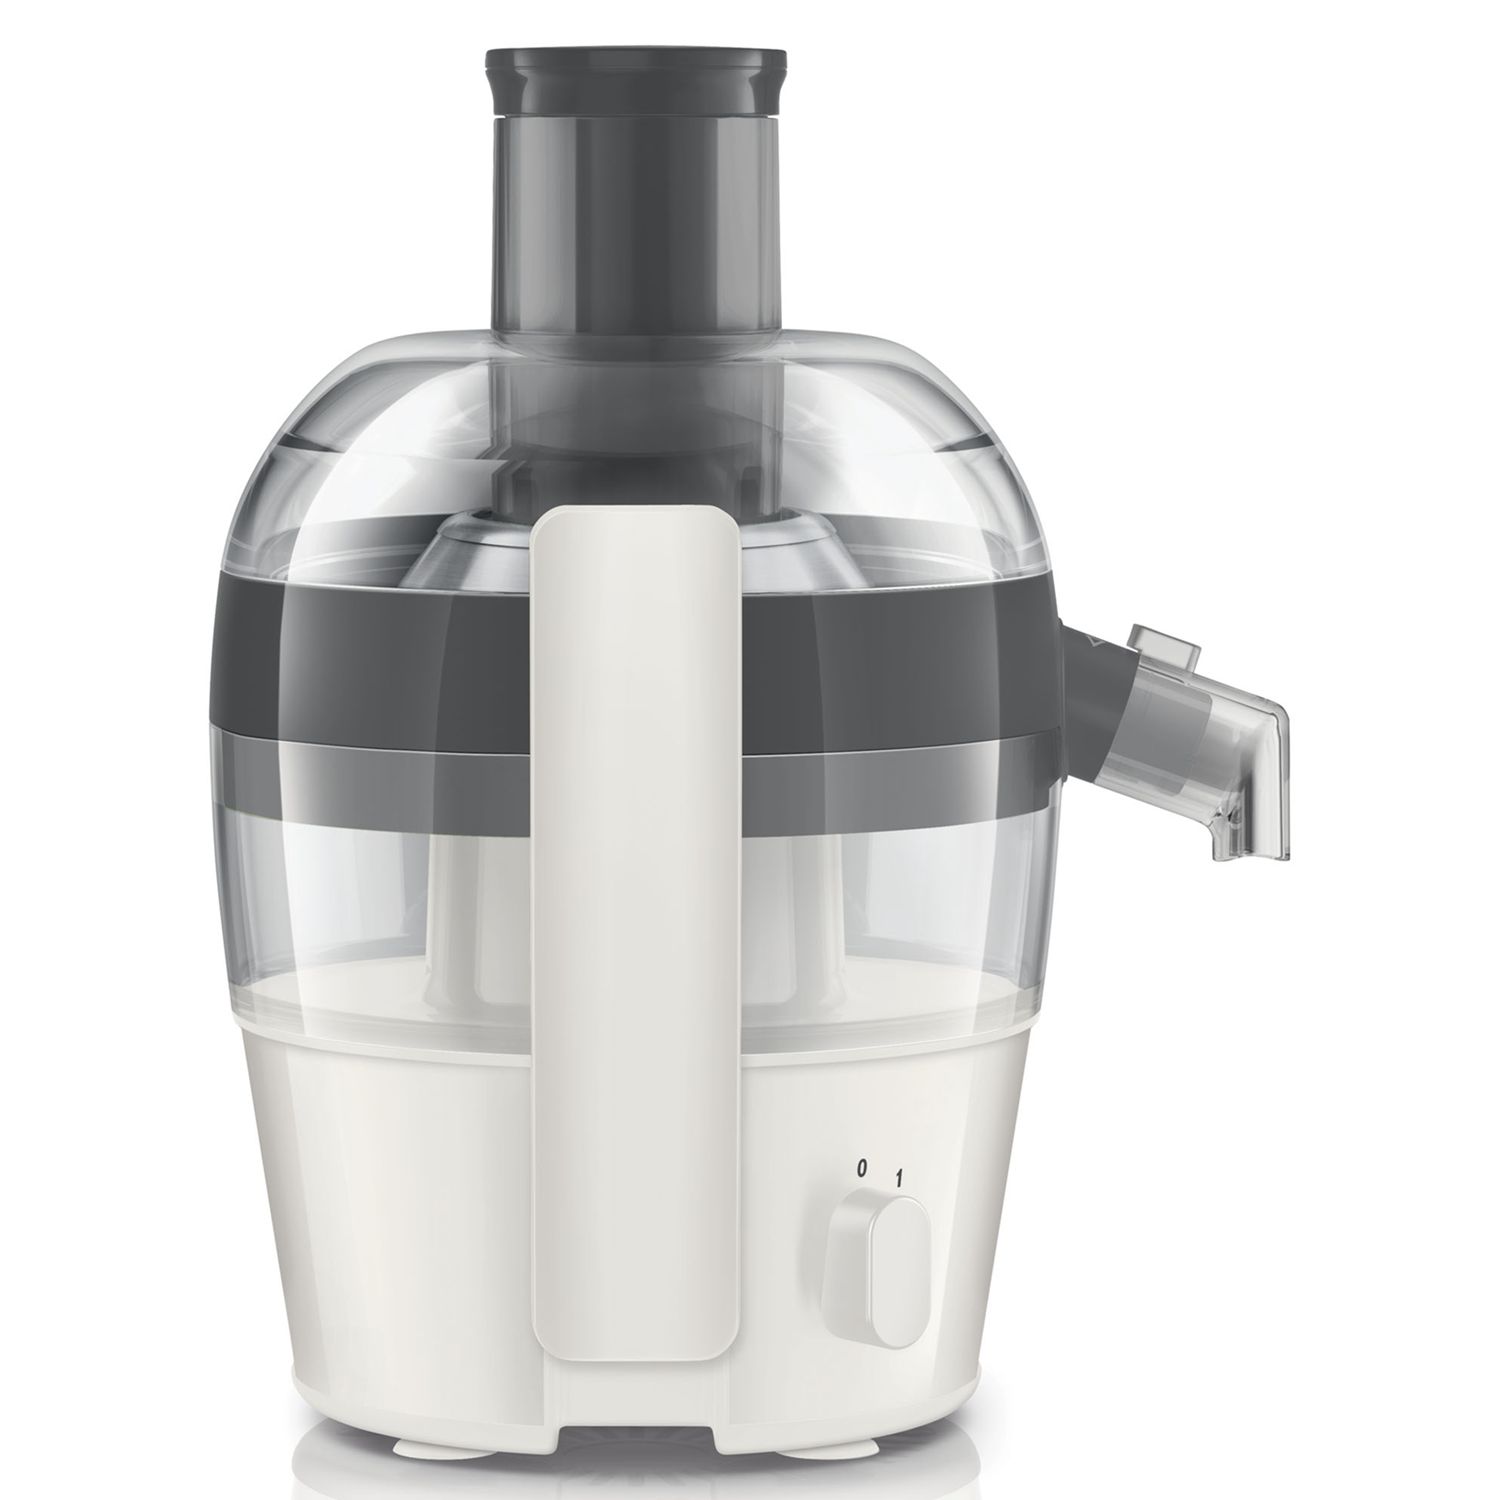 Philips HR1832/31 Compact Viva Collection Juicer, White at John Lewis & Partners